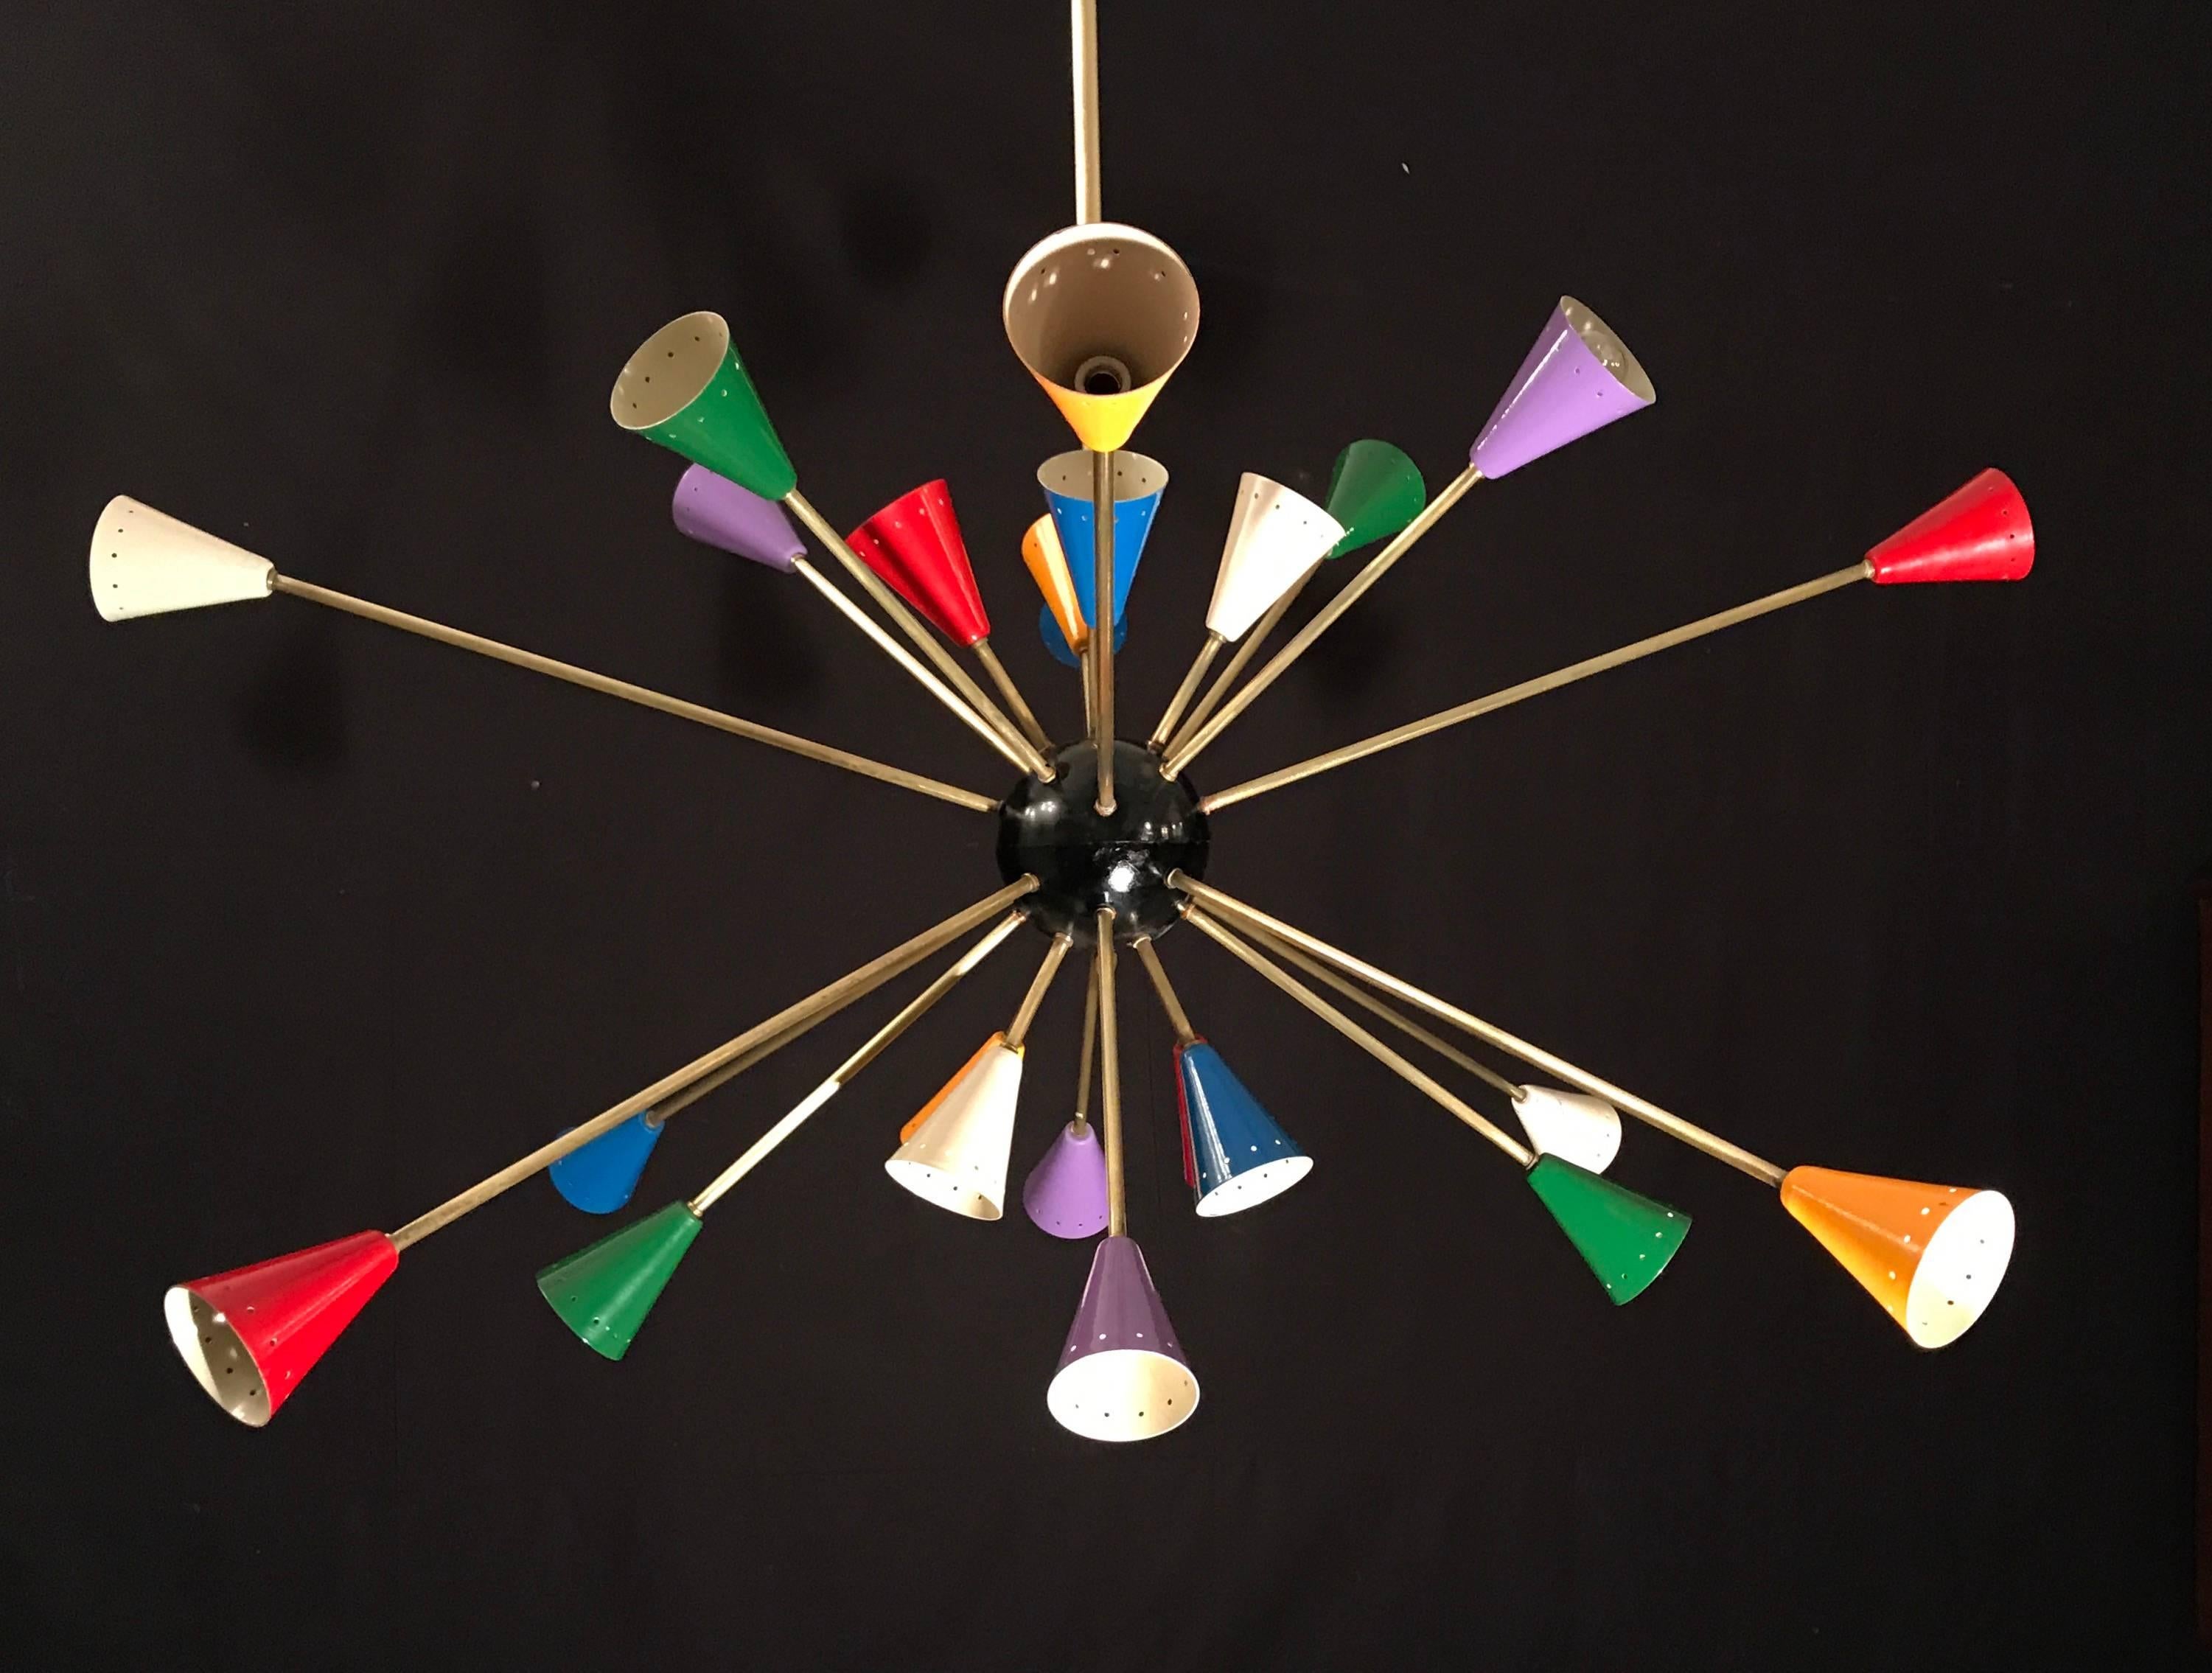 Features 24 brass arms, each sporting multicolored, perforated shades. Black central Sphere.
Bearing a circa 1970s label in the canopy.
Commonly called ' Sputnik' chandeliers today (in honor of the Russian satellite that inspired a war and a design